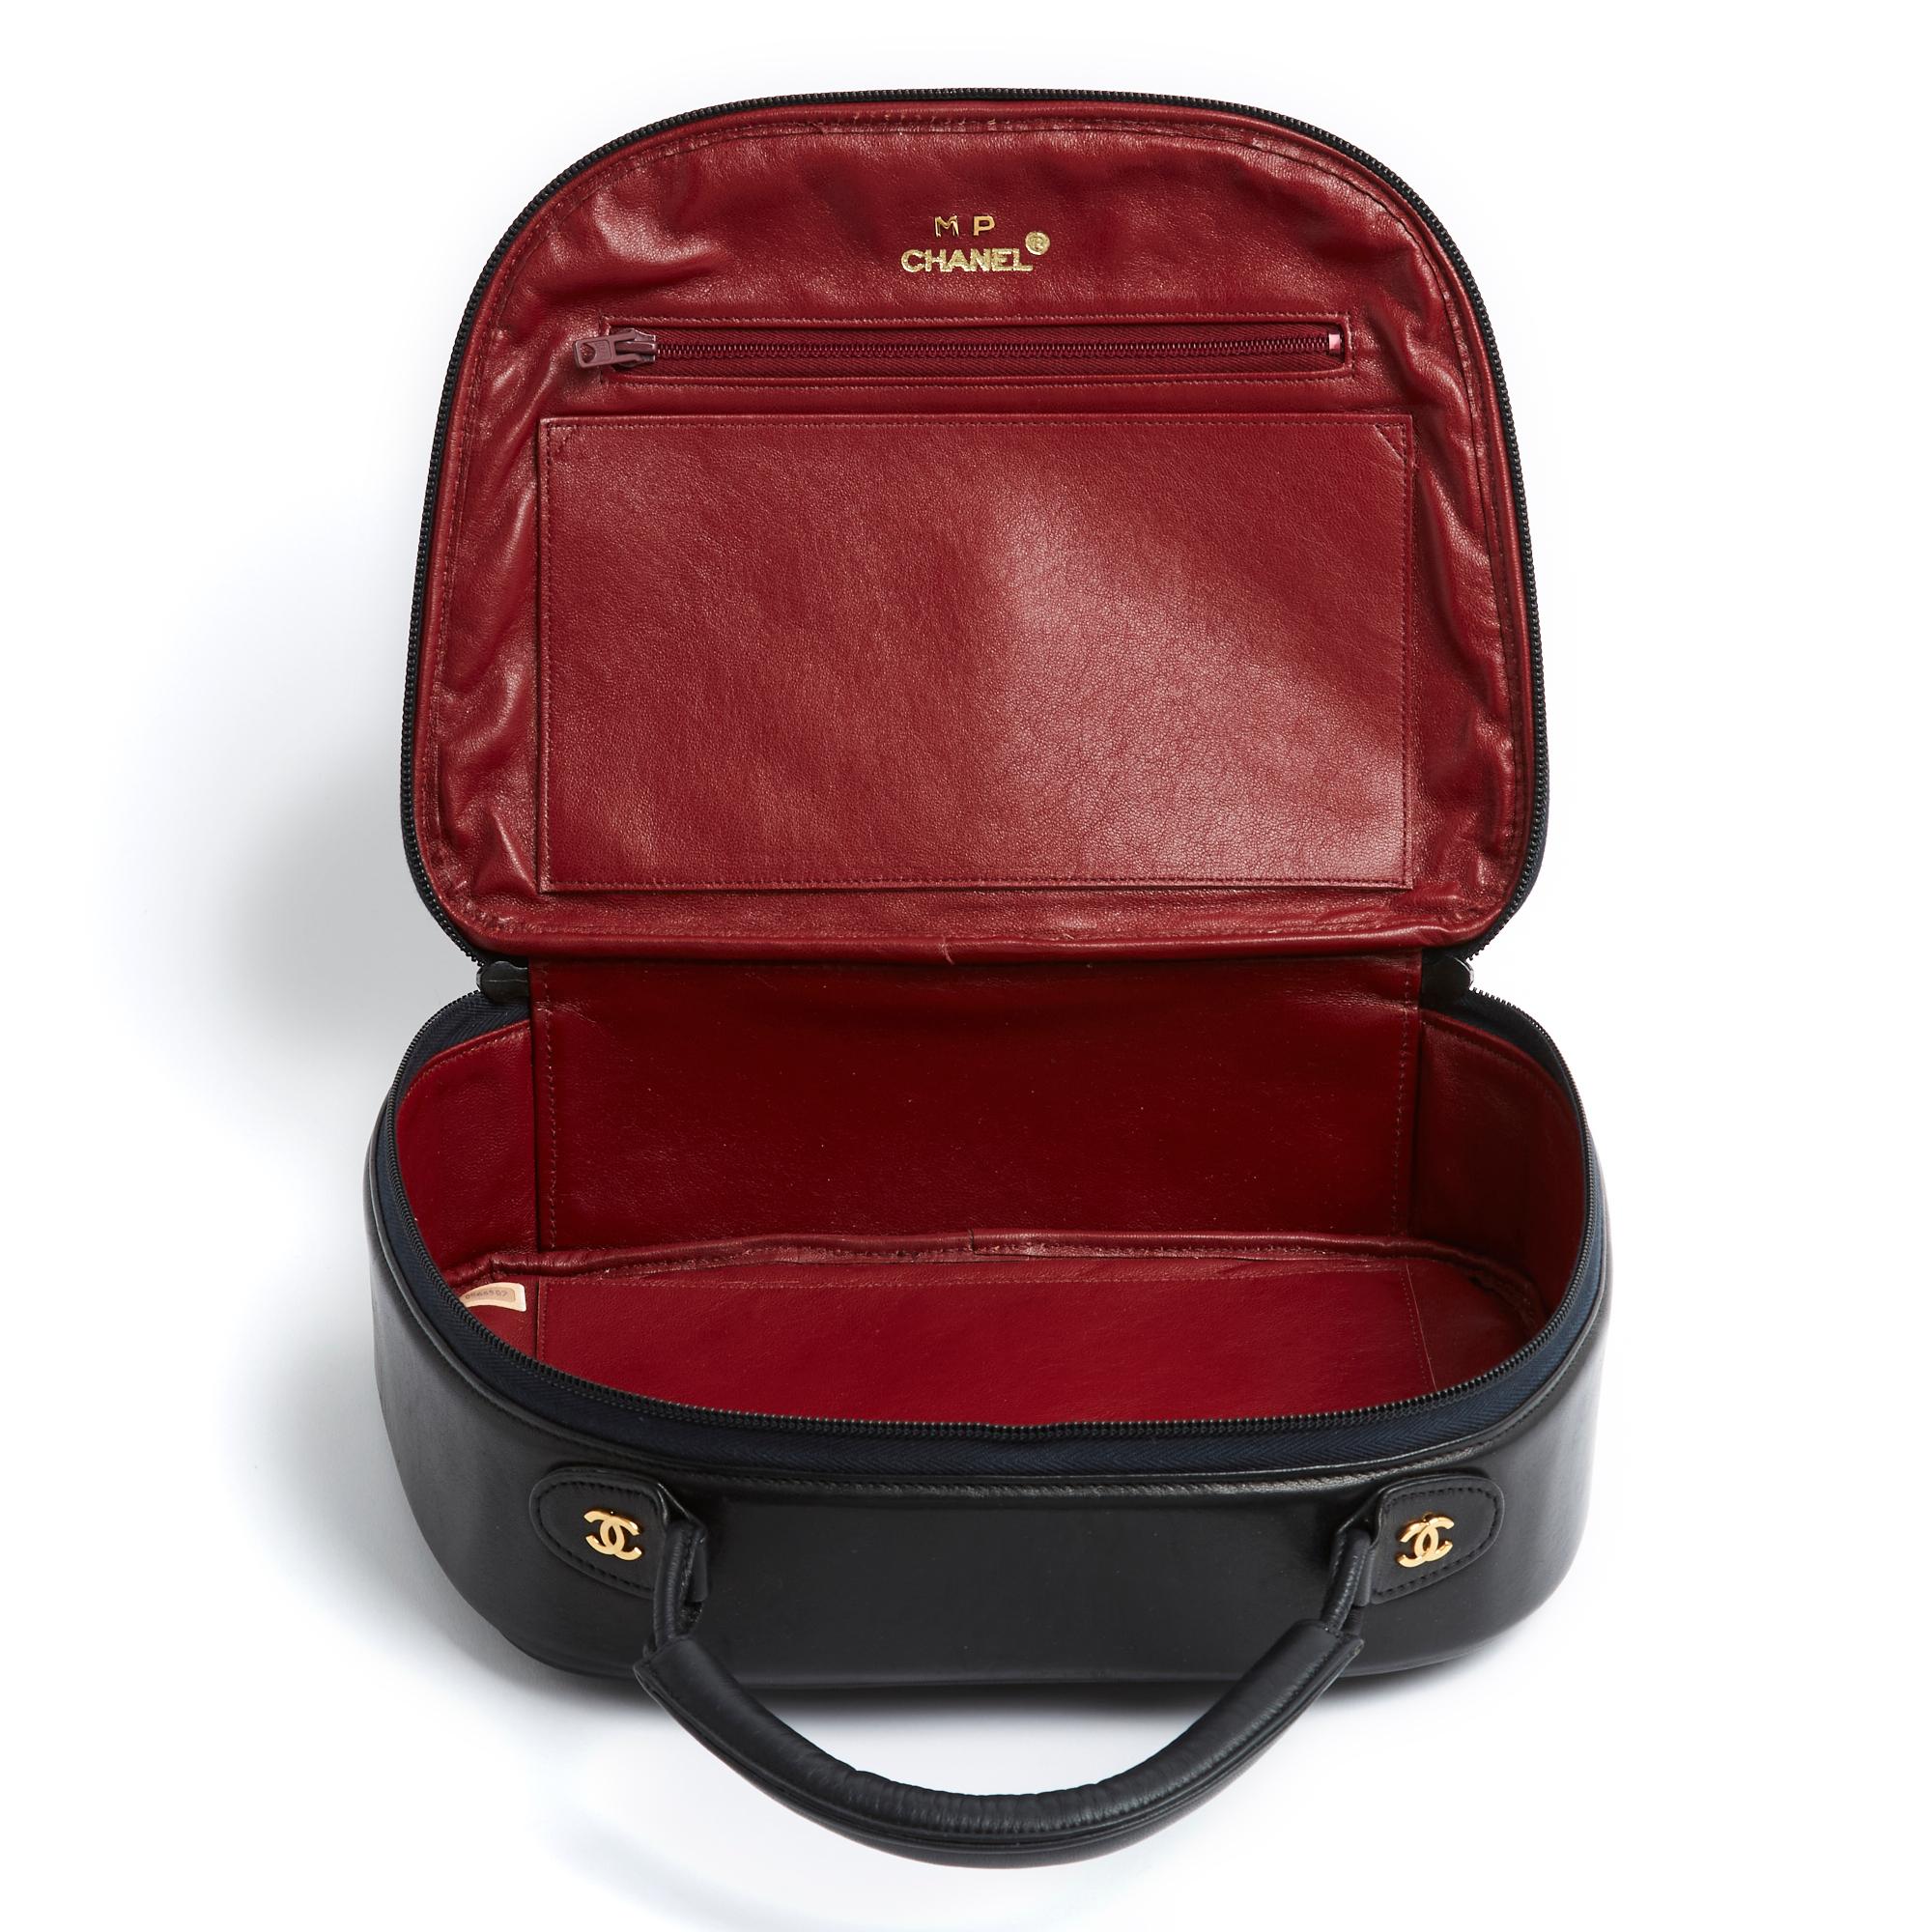 1985 Timeless Classique Black Leather Vanity Hand bag For Sale 1